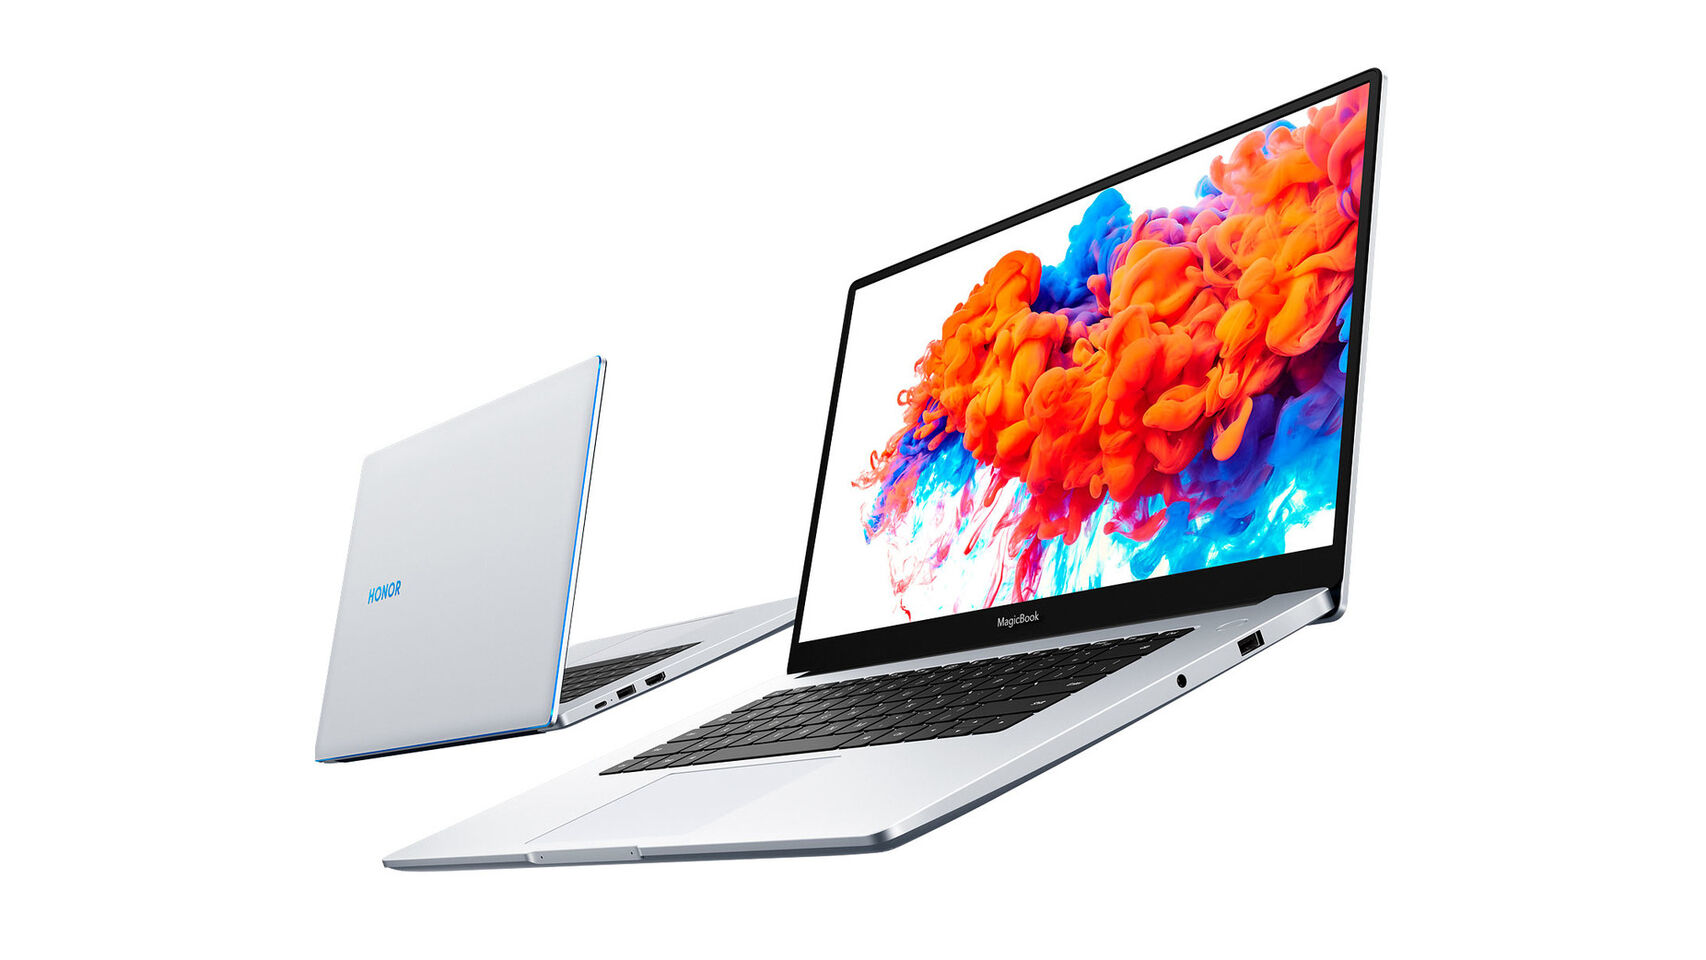 The starting price to acquire the laptops is 3,299 yuan equivalent to 425 euros